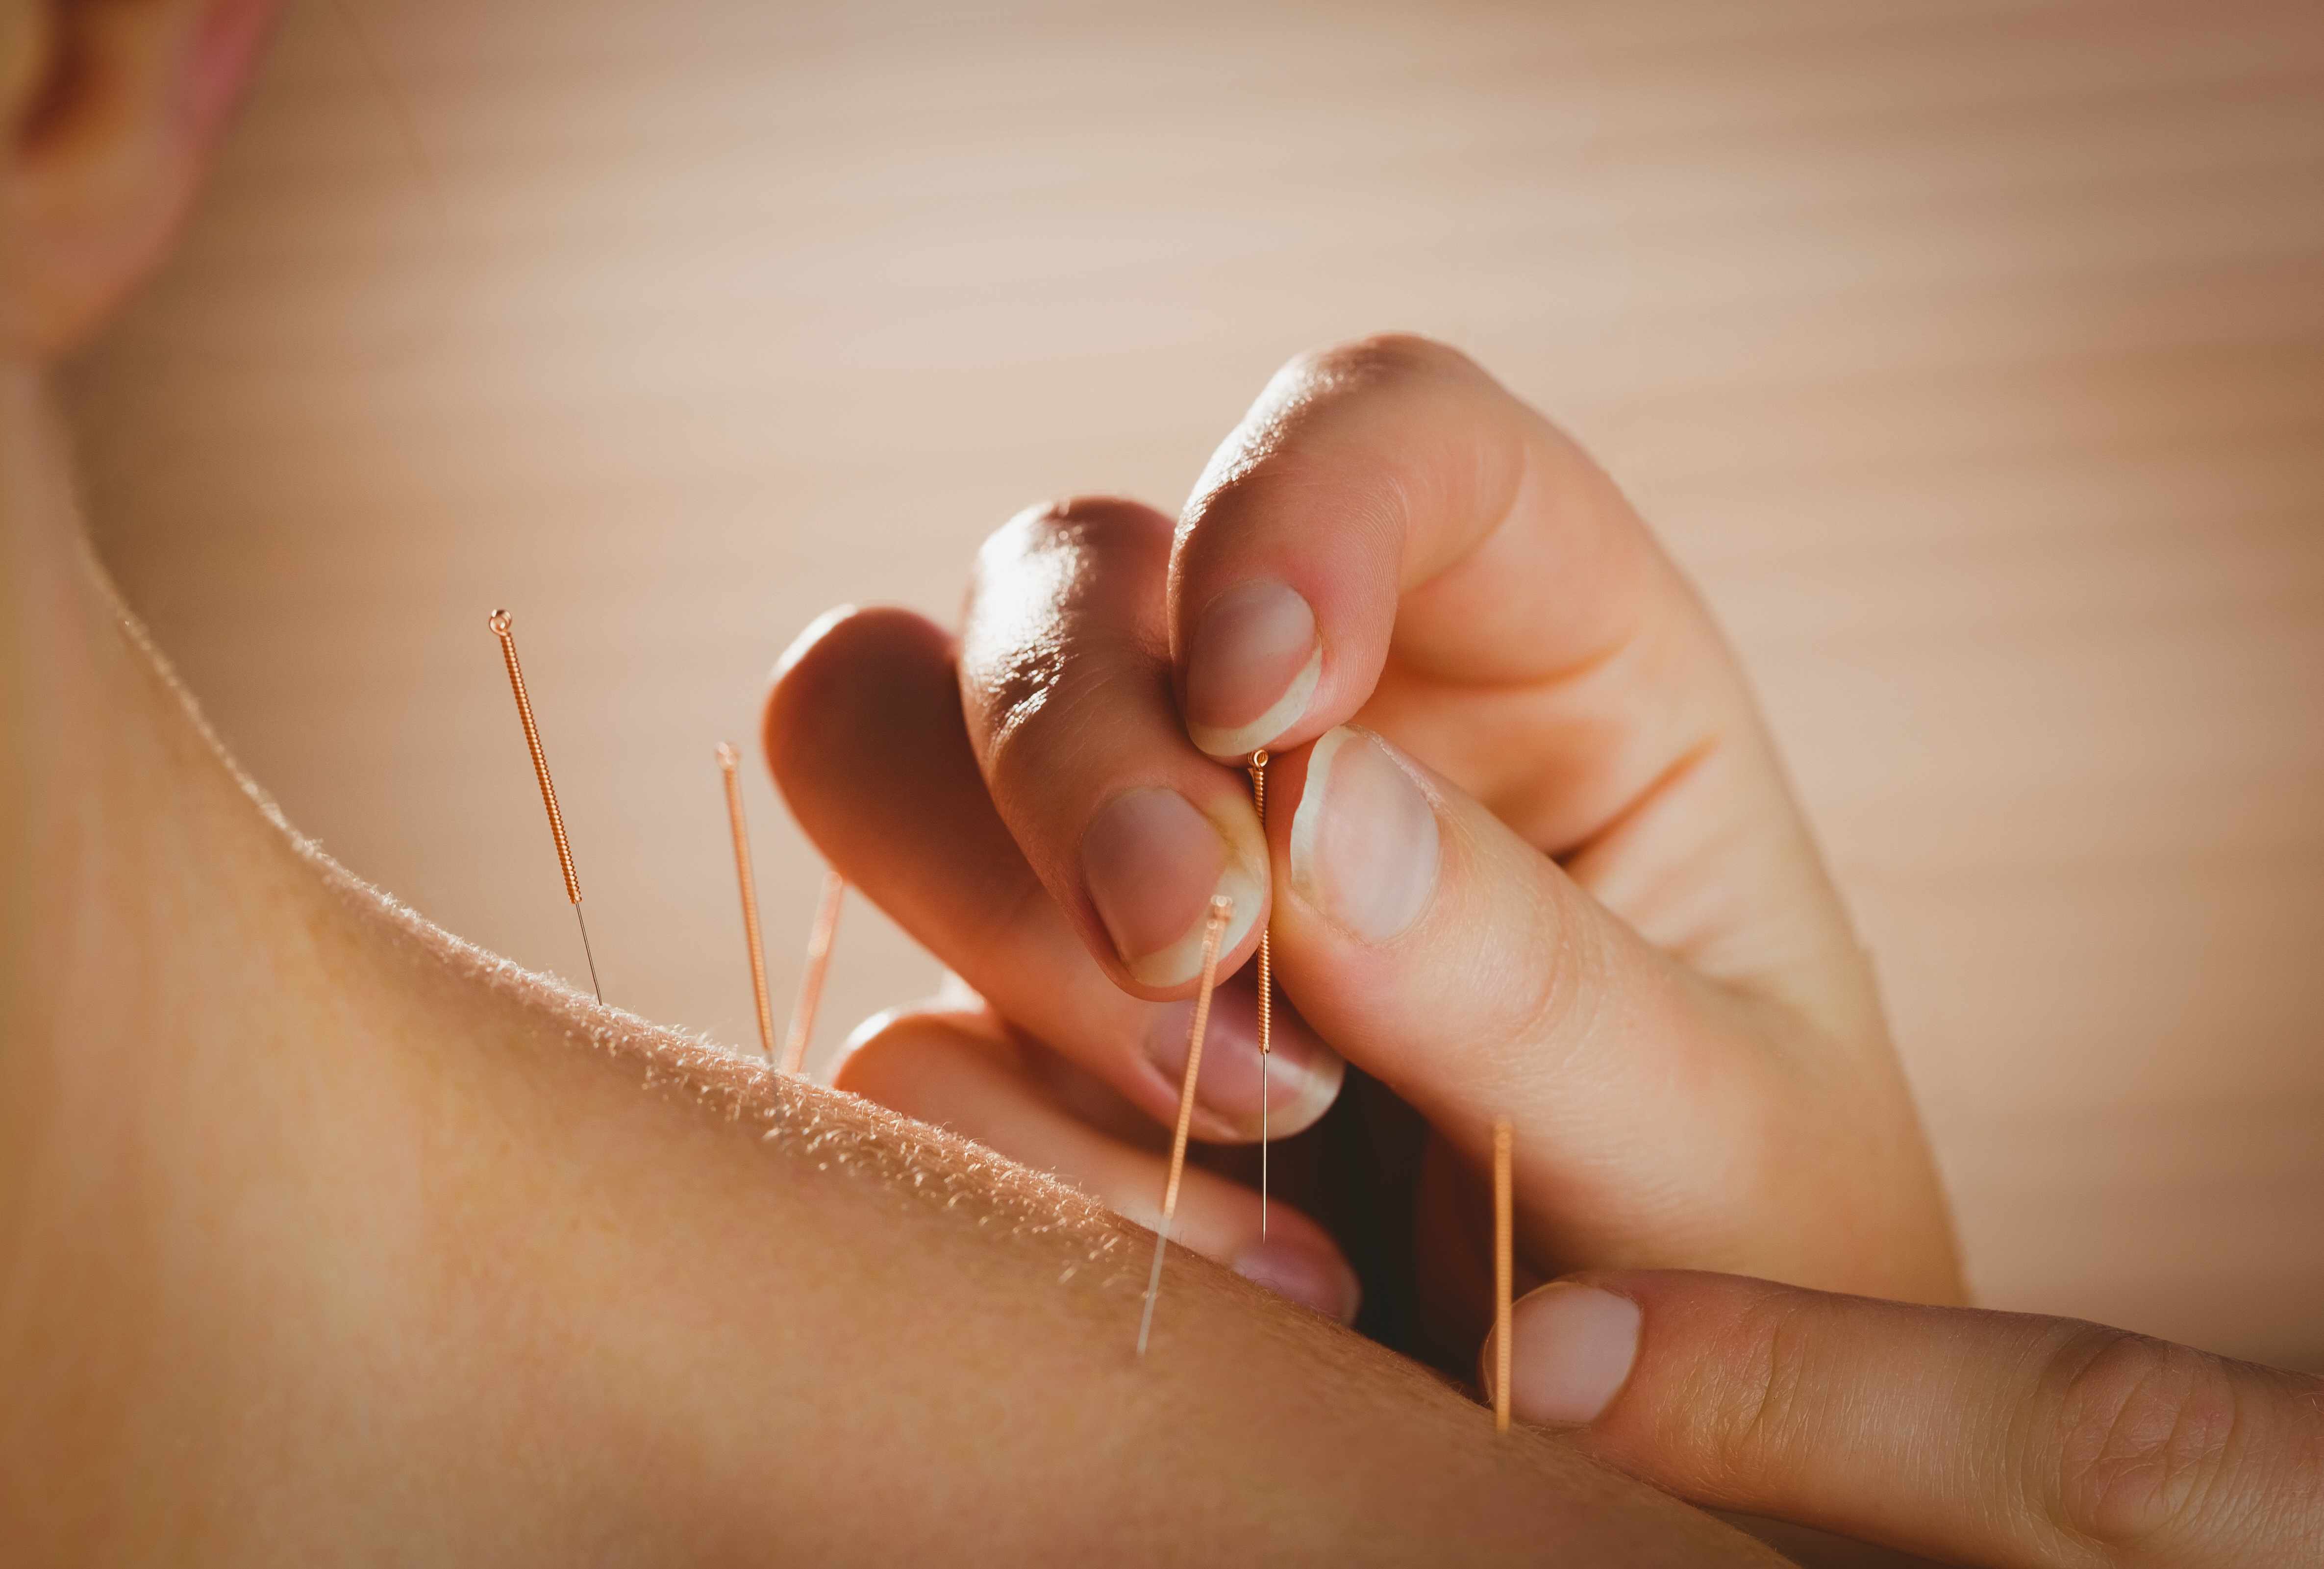 a close-up of the application of acupuncture needles to a person's upper back and neck region